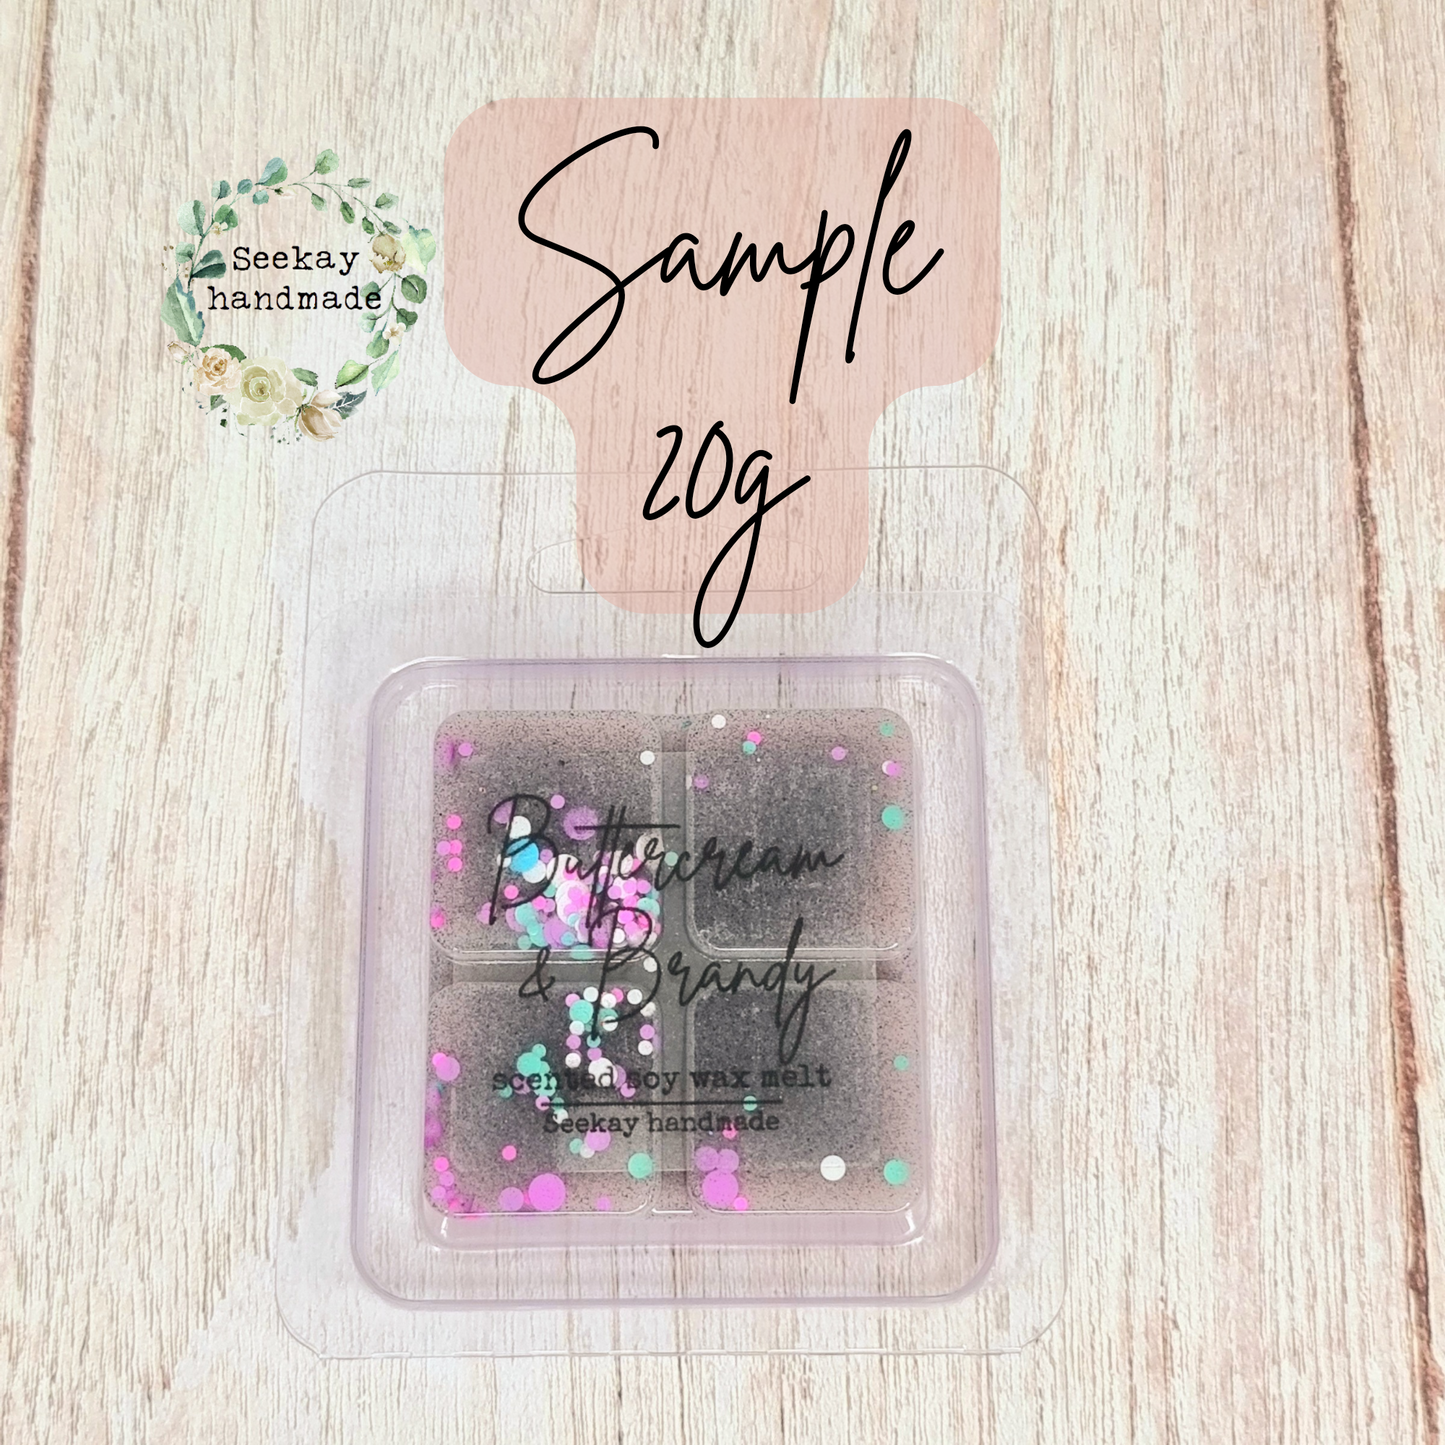 Buttercream & Bràndy scented soy wax melt